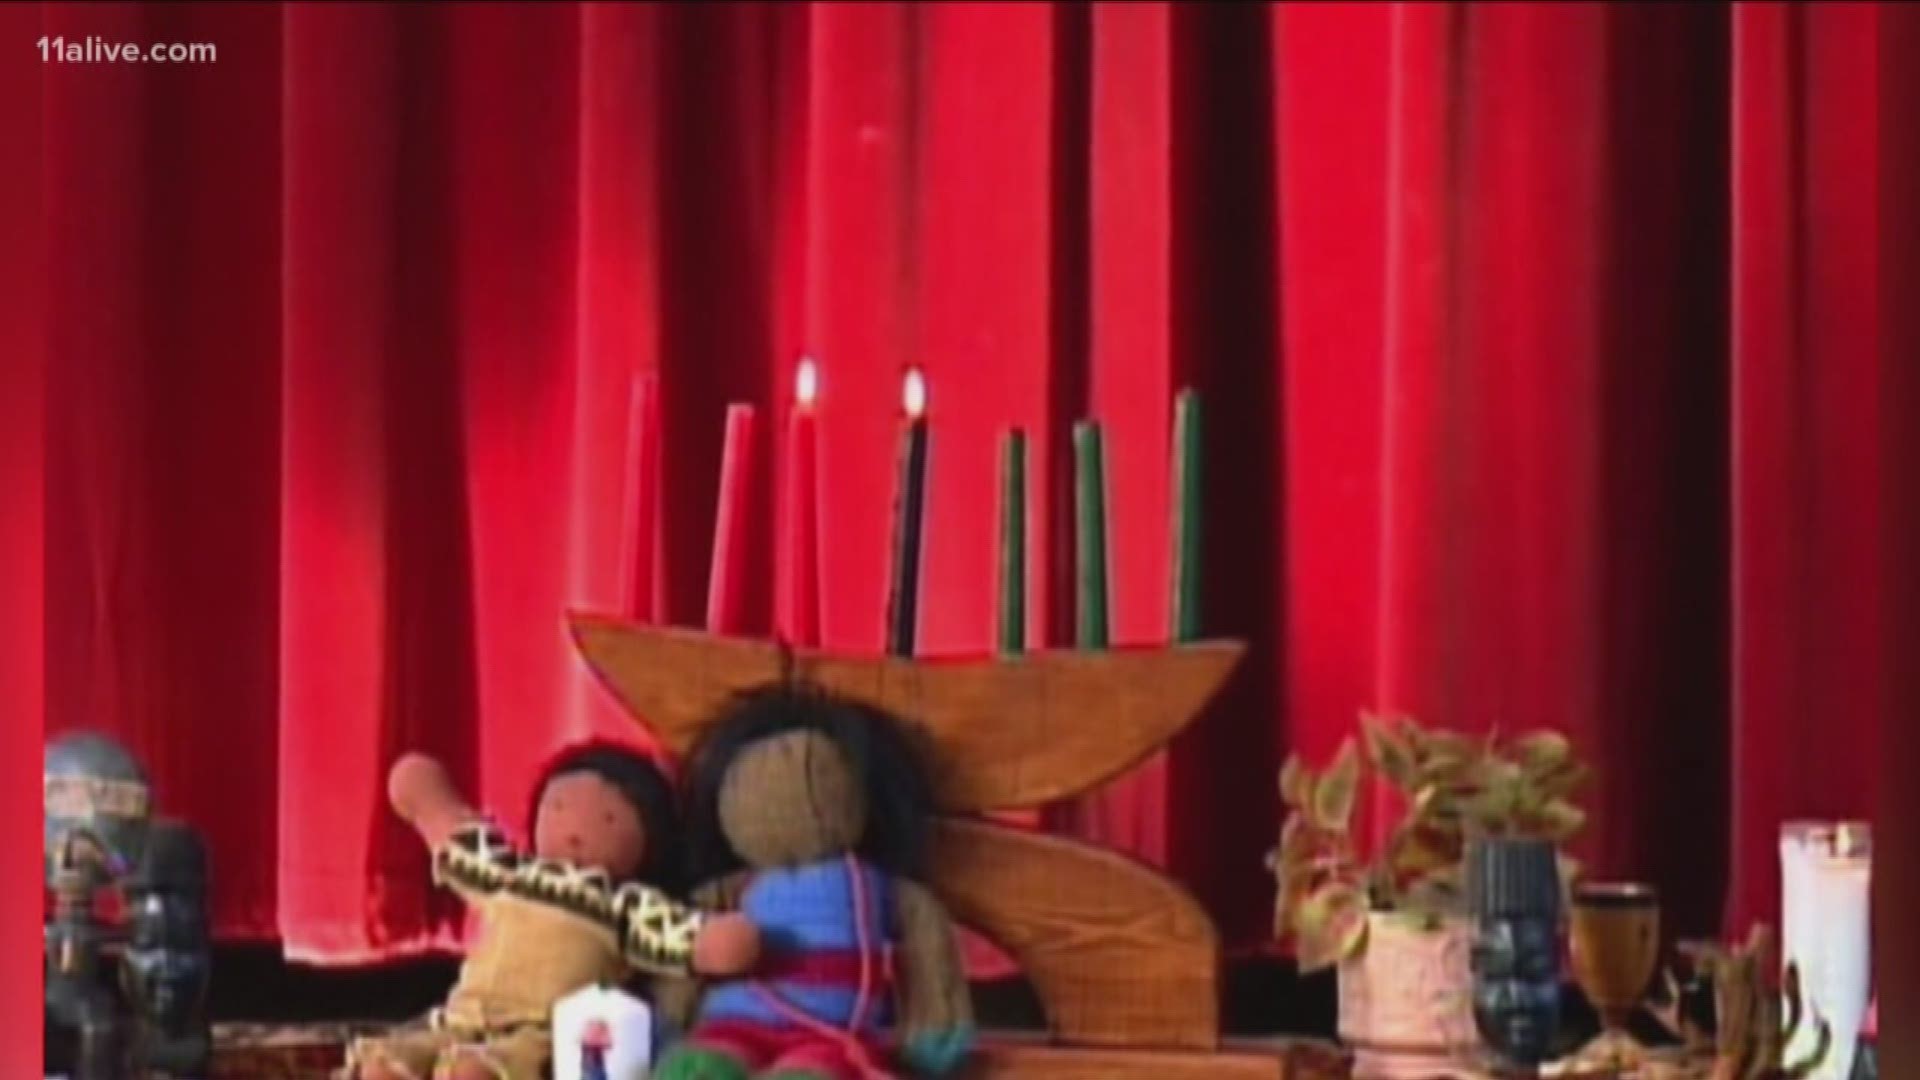 East Point's Kwanzaa celebration is happening at 3 p.m. Sunday on Main Street in downtown East Point.